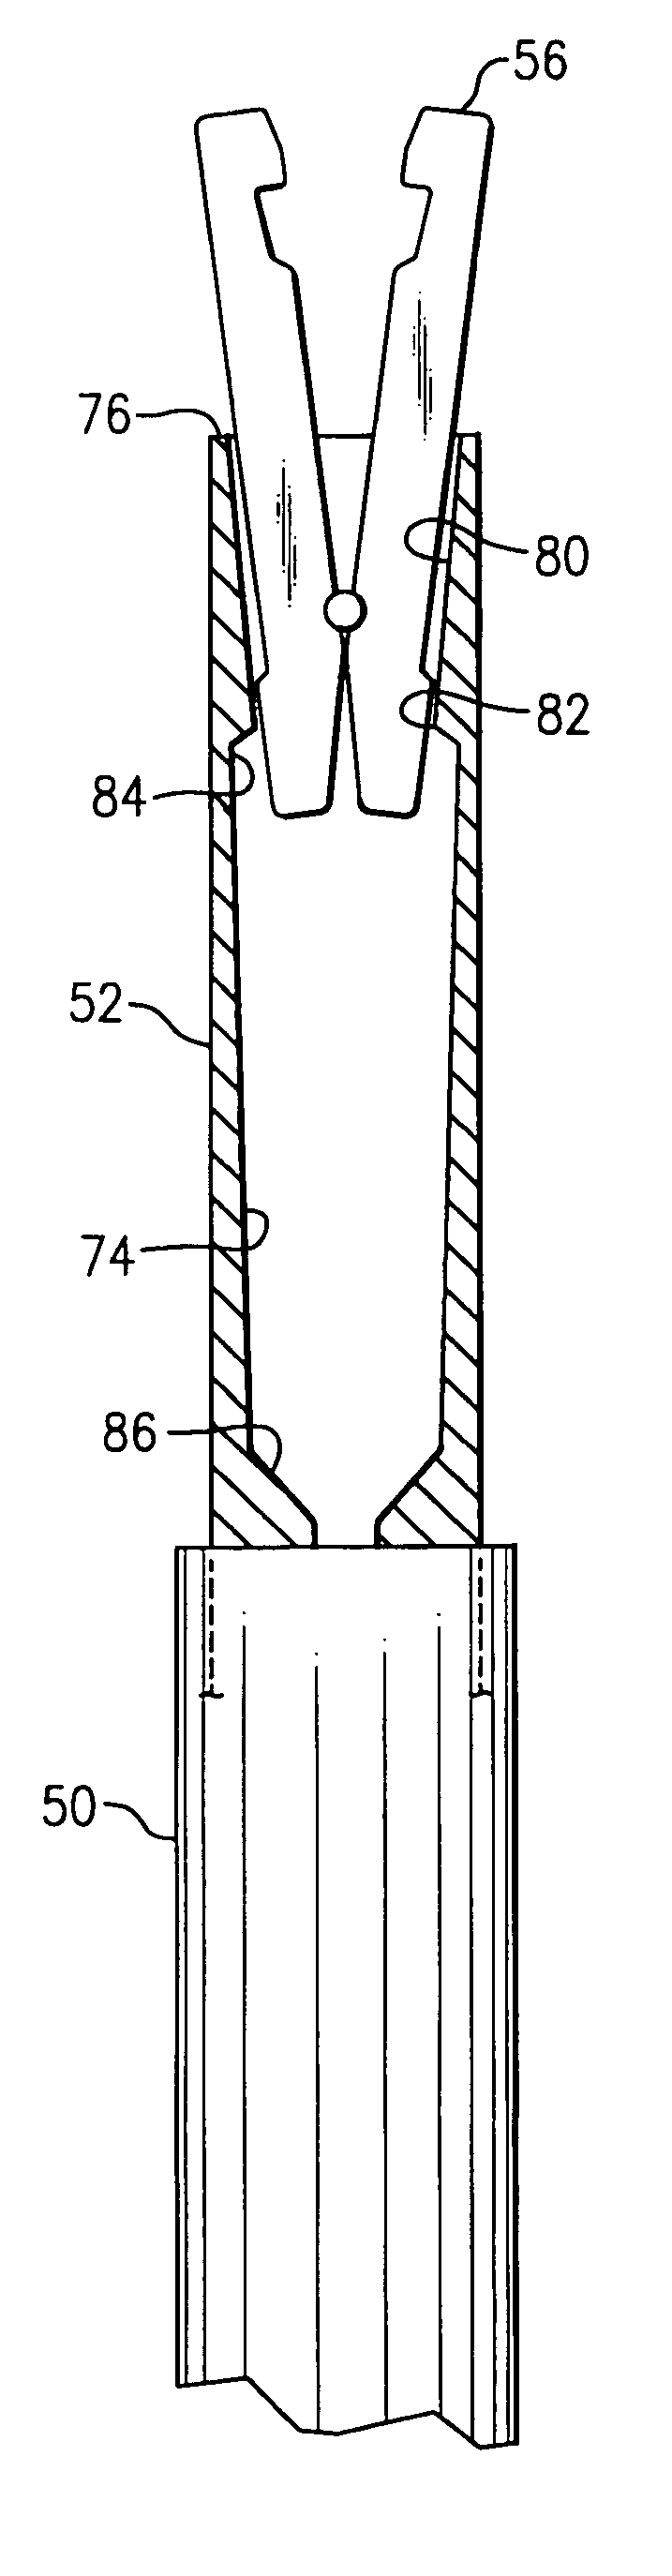 Device for securing trim to a seat